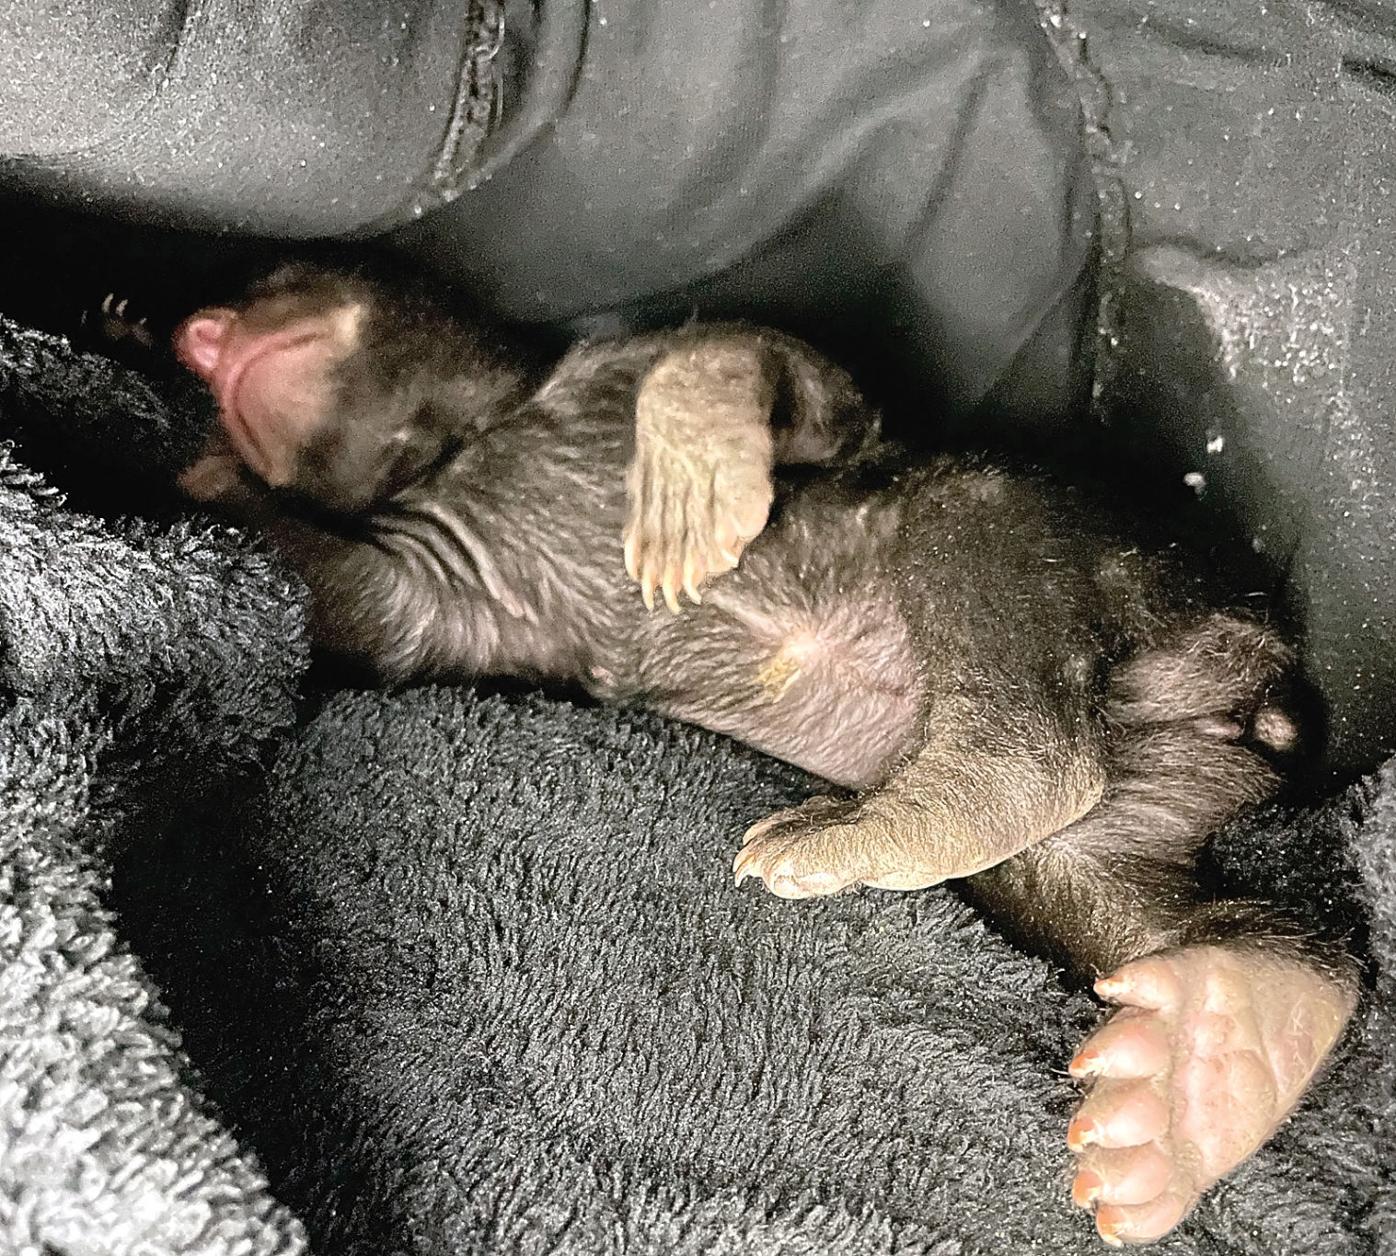 Three Little Bears Triplet Sisters Arrive At Bear Rescue News Thedailytimes Com